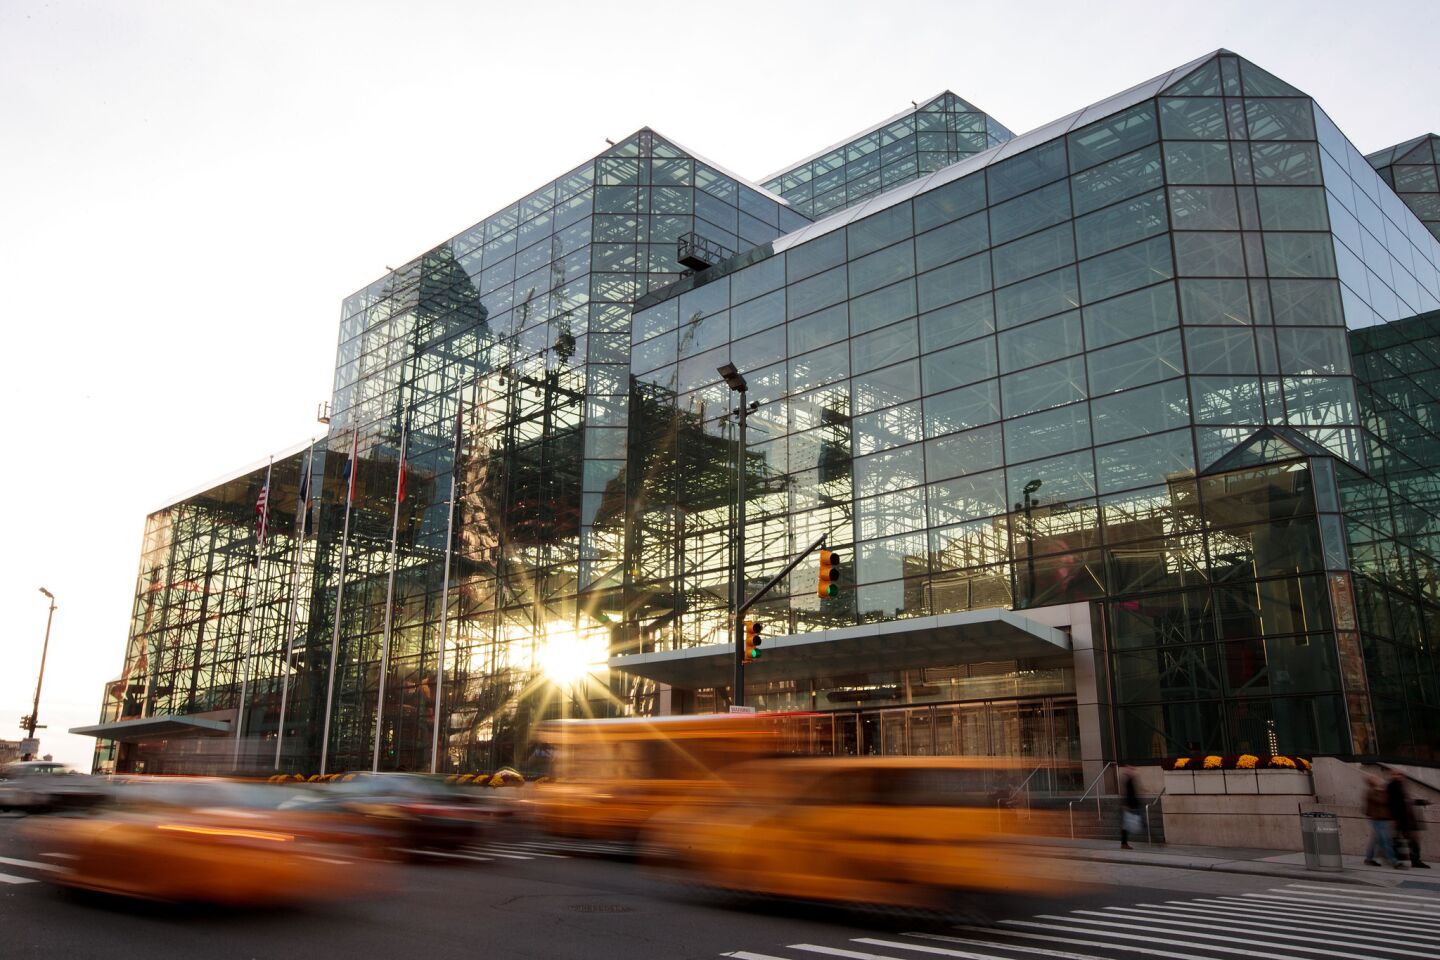 The Jacob K. Javits Convention Center in New York City, another I.M. Pei design.